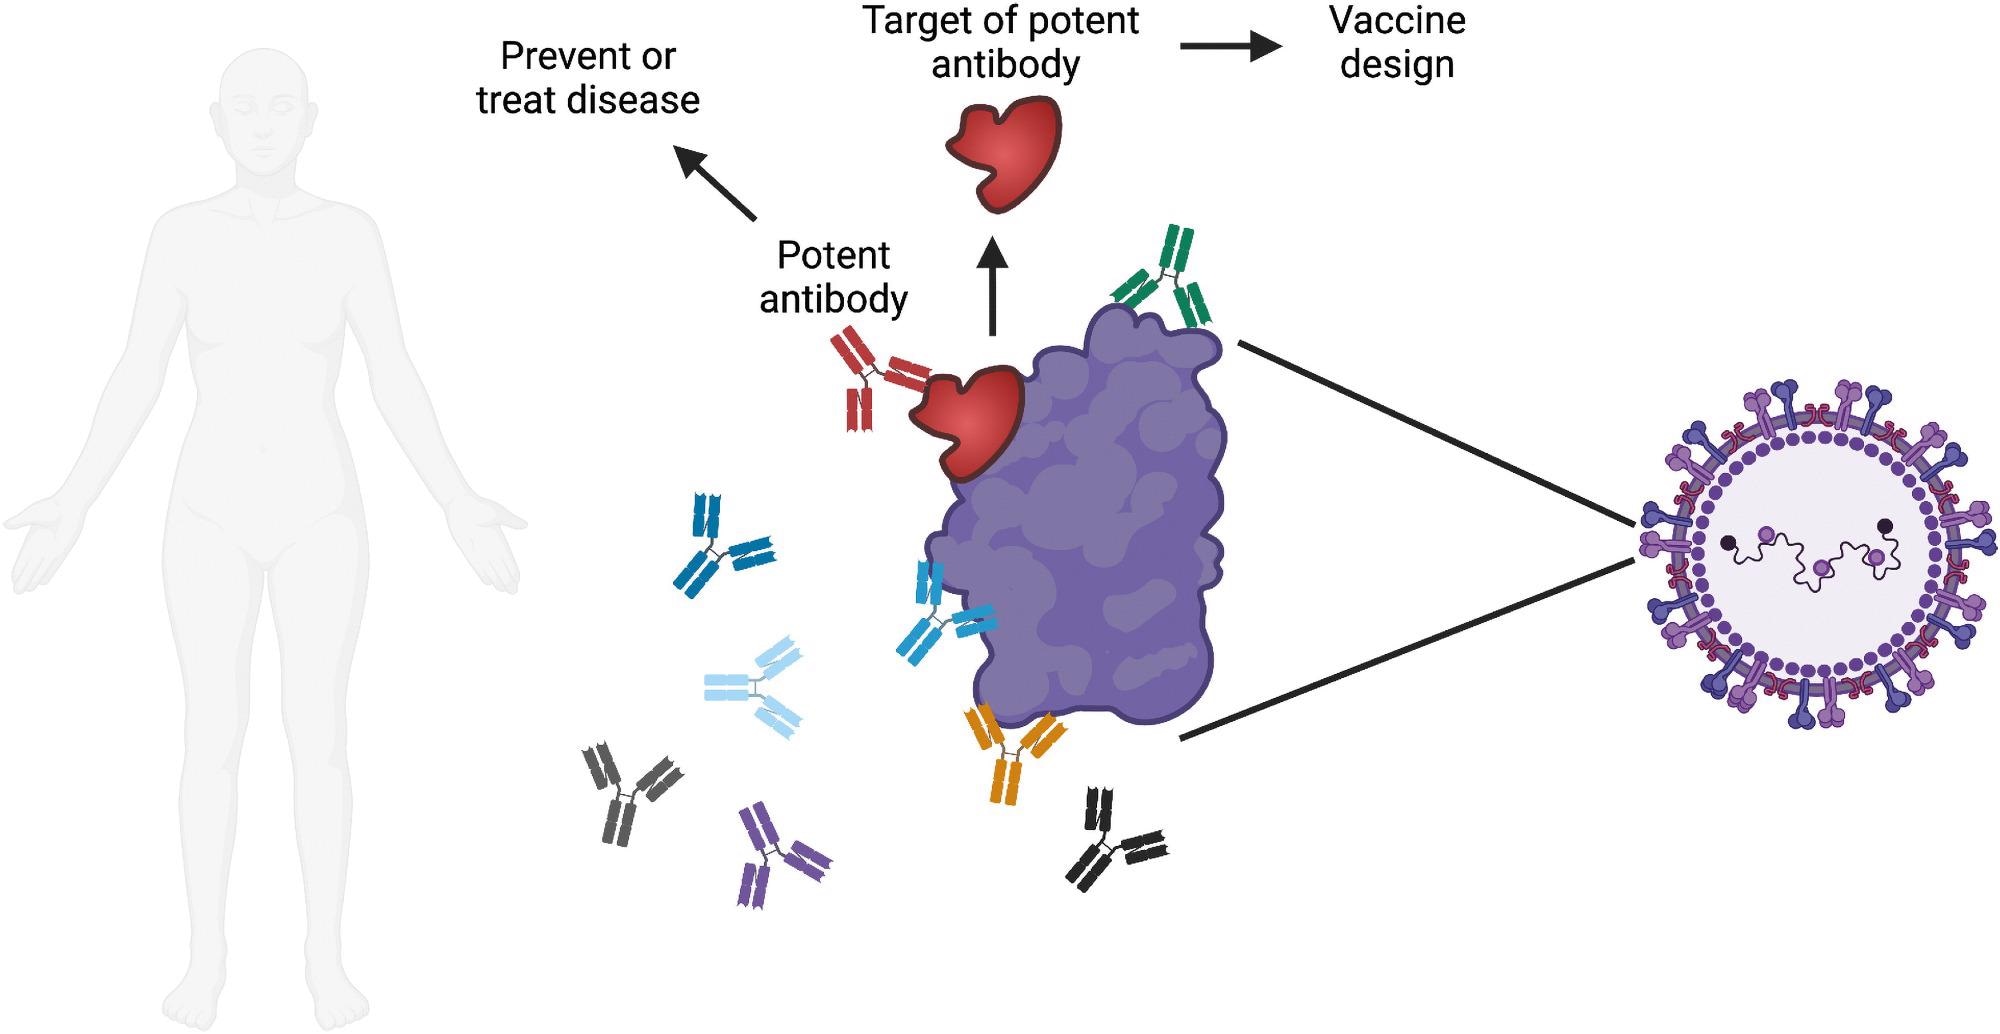 Overview of research into monoclonal antibodies.  Each person makes many different antibodies in response to infection or vaccination.  A major goal of monoclonal antibody research is to identify the most potent antibodies to a specific pathogen of interest.  Potent antibodies can be tested for the ability to prevent or treat disease in humans.  The site of the pathogen bound by the potent antibody can be evaluated for use in a vaccine for the purpose of triggering the production of these potent antibodies when the vaccine is administered.  Image created with Biorender.com.